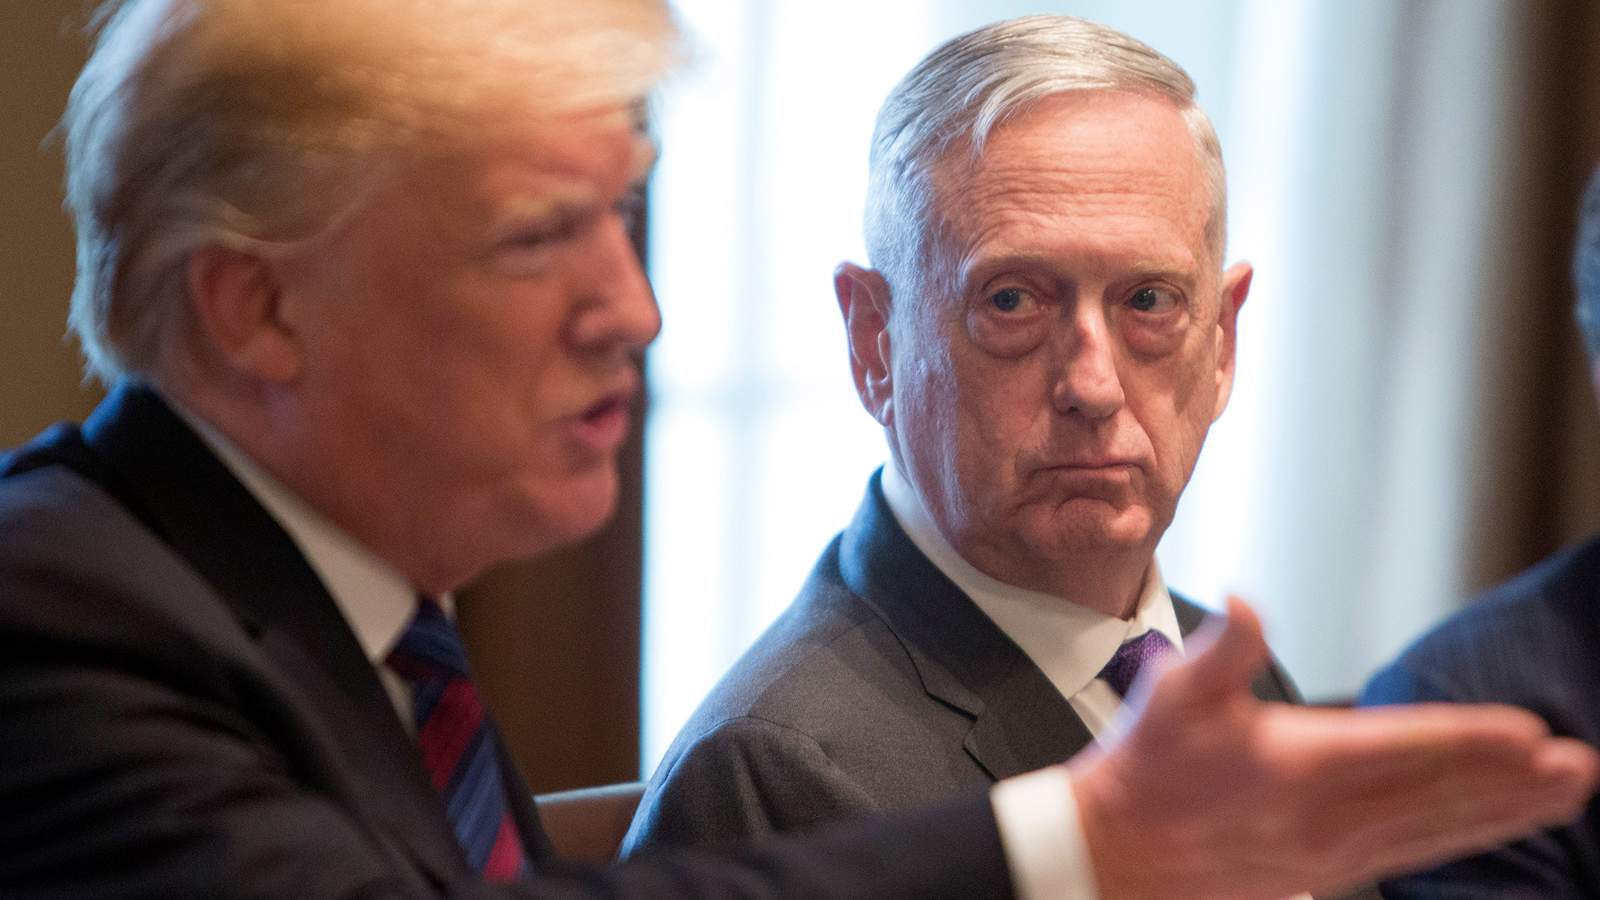 Mattis tears into Trump: We are witnessing the consequences of three years without mature leadership